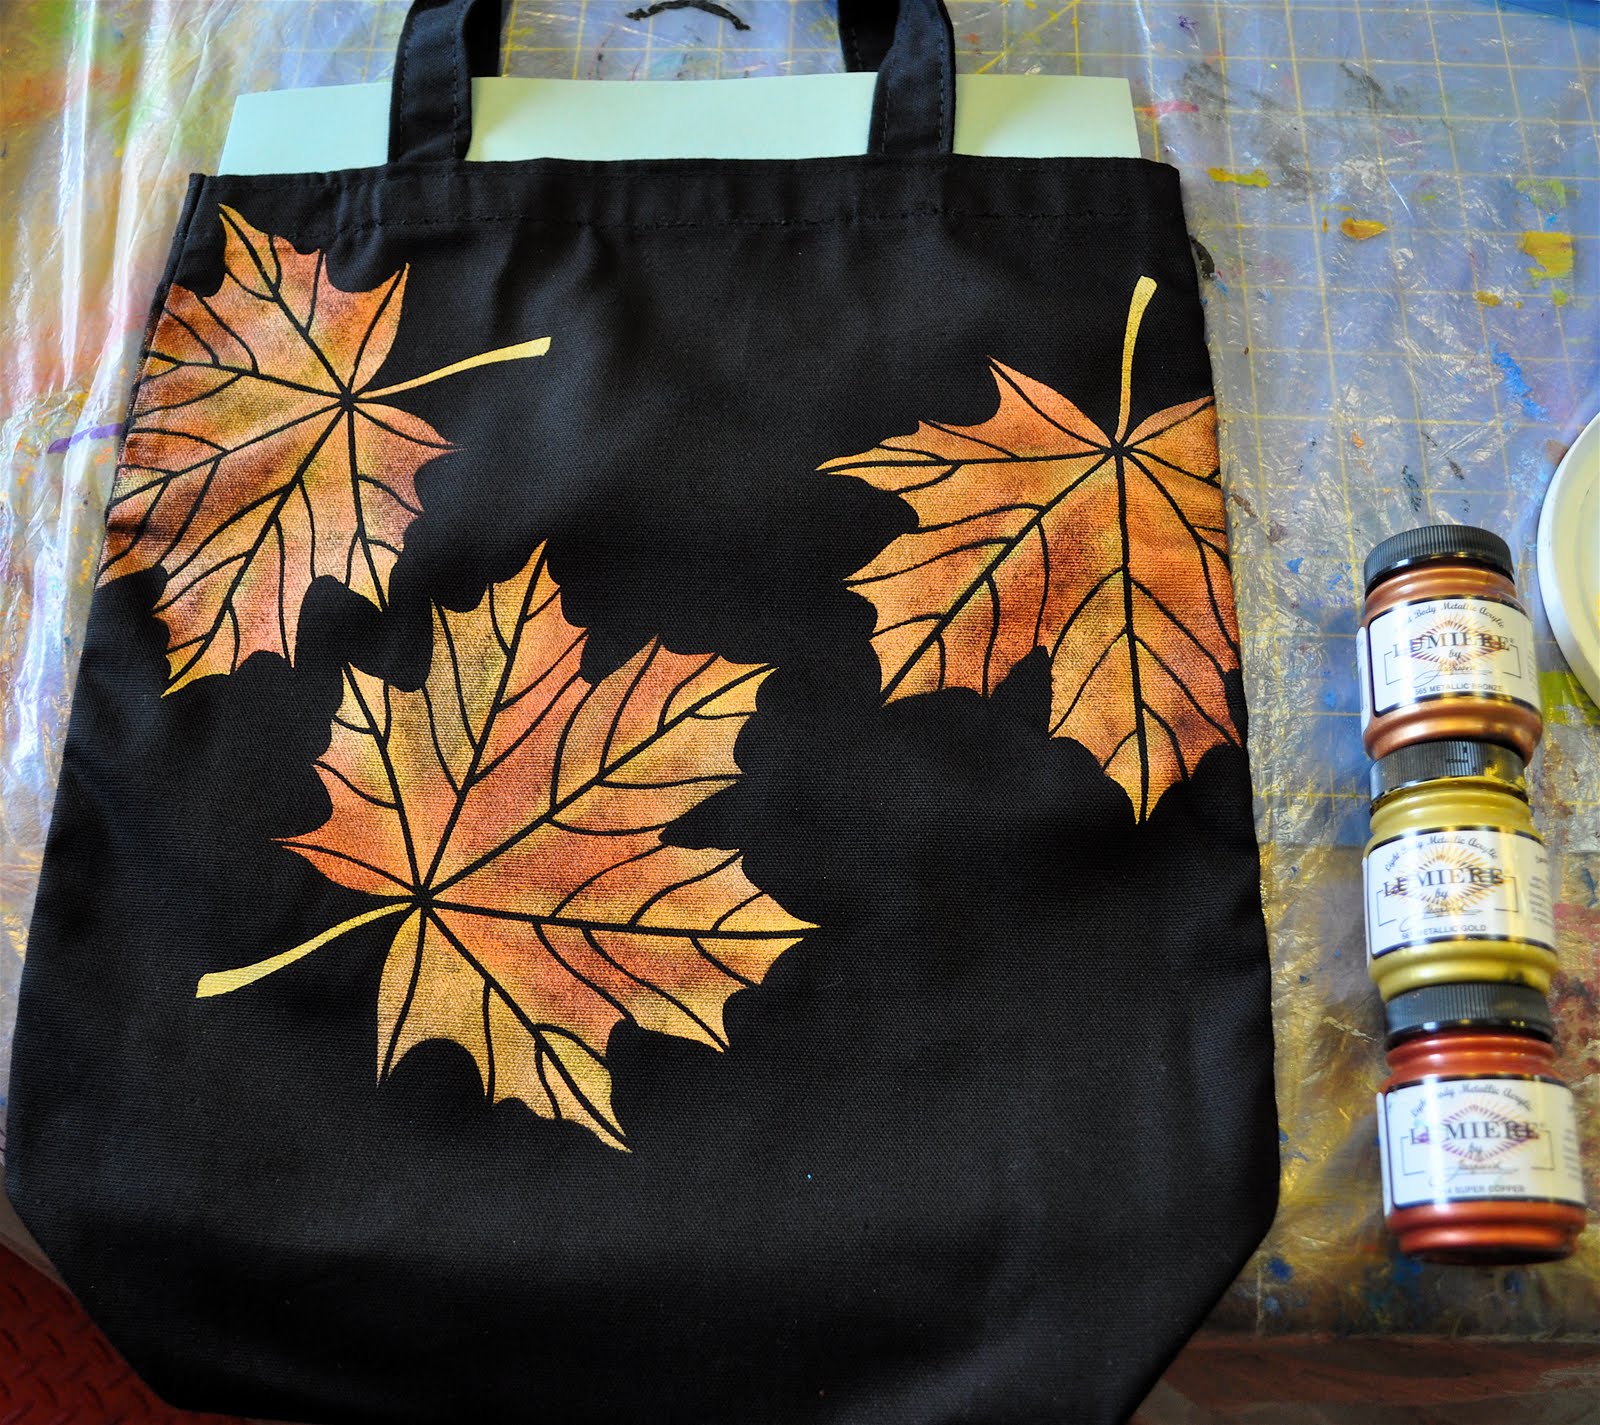 How Topaint A Creative Design On A Black Canvas Travelling Bag Dalet Art Gallery